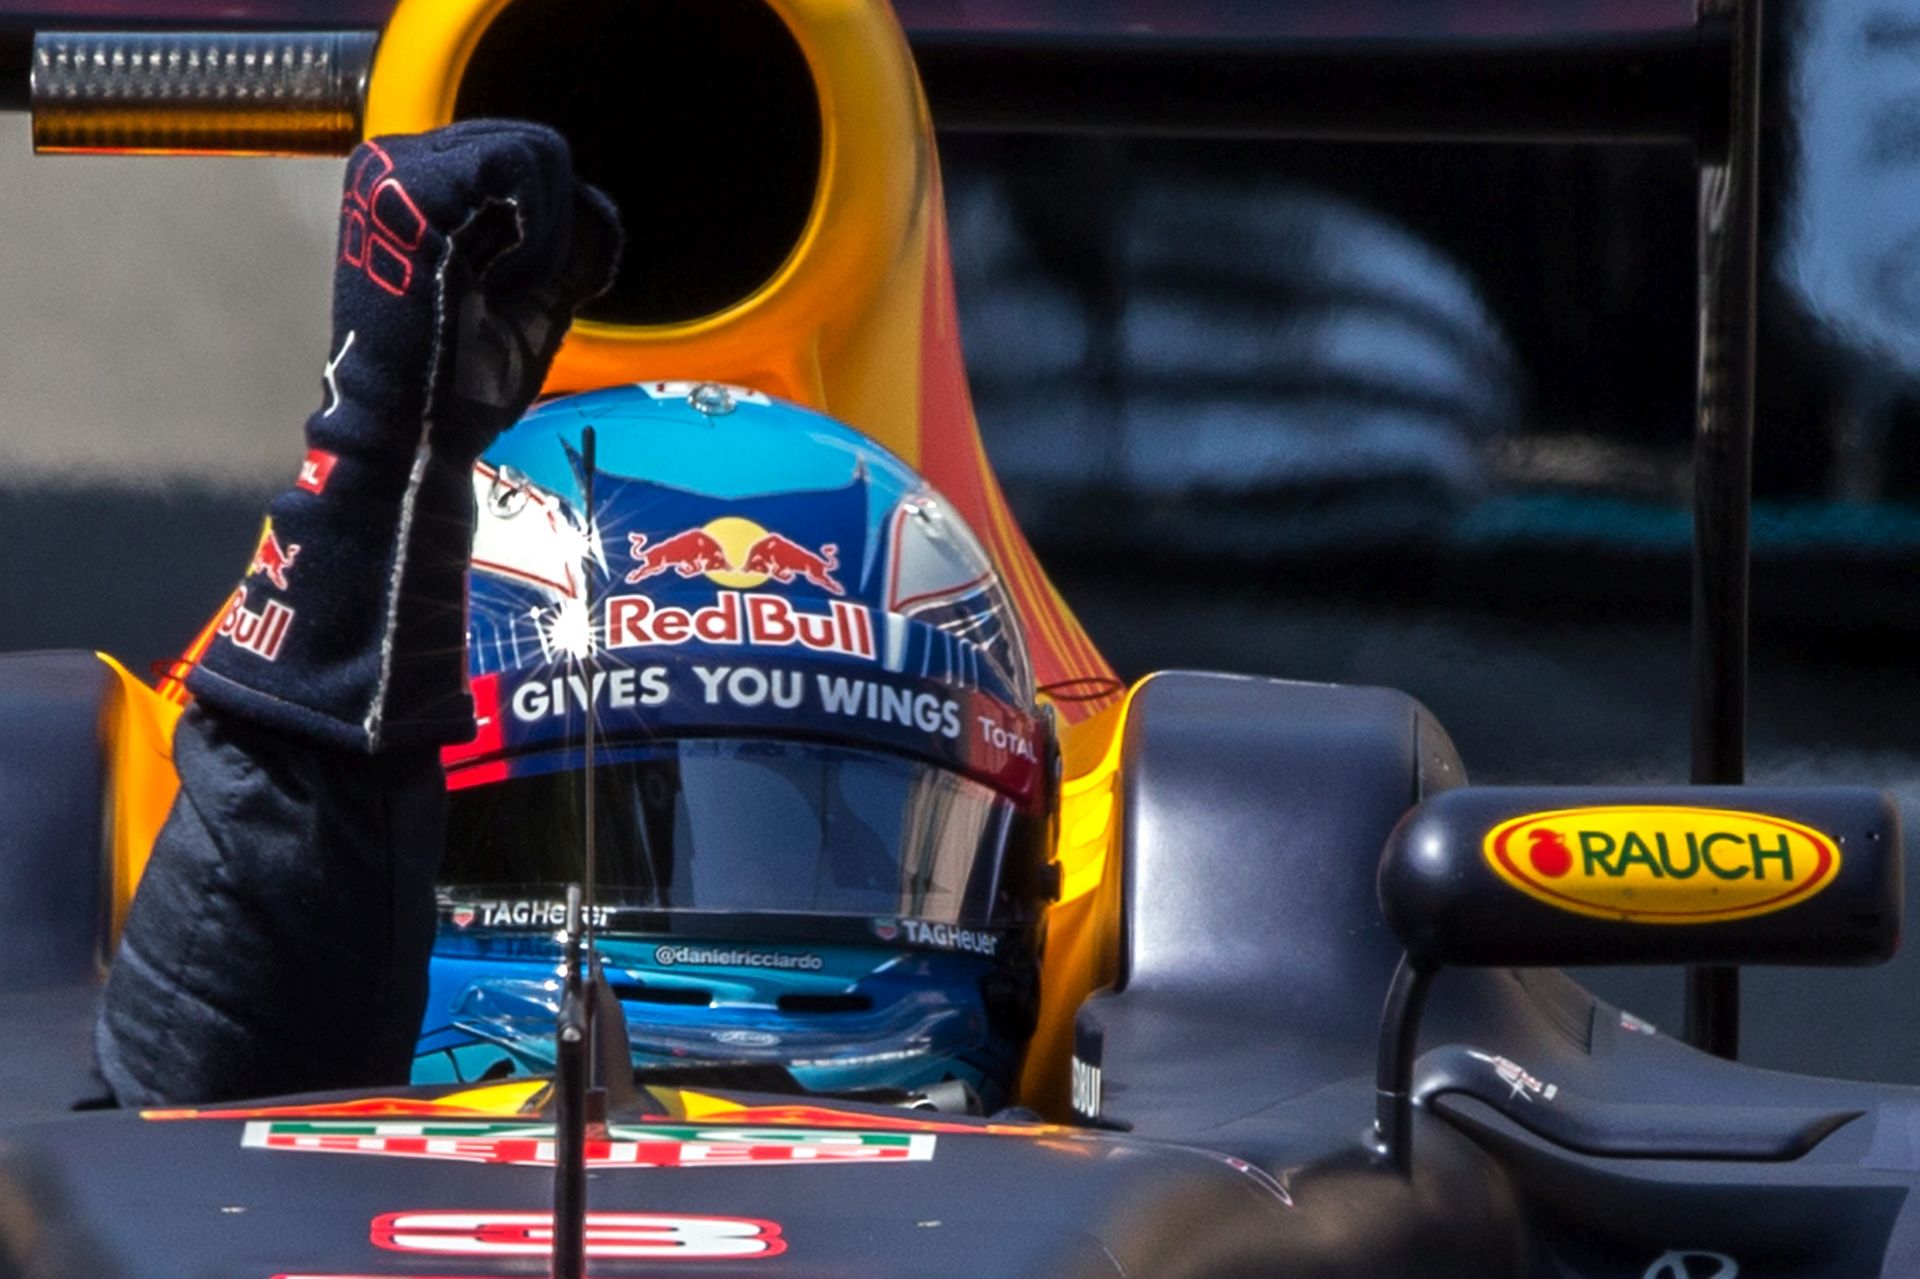 epa05333656 Australian Formula One driver Daniel Ricciardo of Red Bull Racing reacts after he took pole position during the qualifying session of the Monaco Formula One Grand Prix at the Monte Carlo circuit in Monaco, 28 May 2016. The 2016 Formula One Grand Prix of Monaco will take place on 29 May 2016.  EPA/VALDRIN XHEMAJ